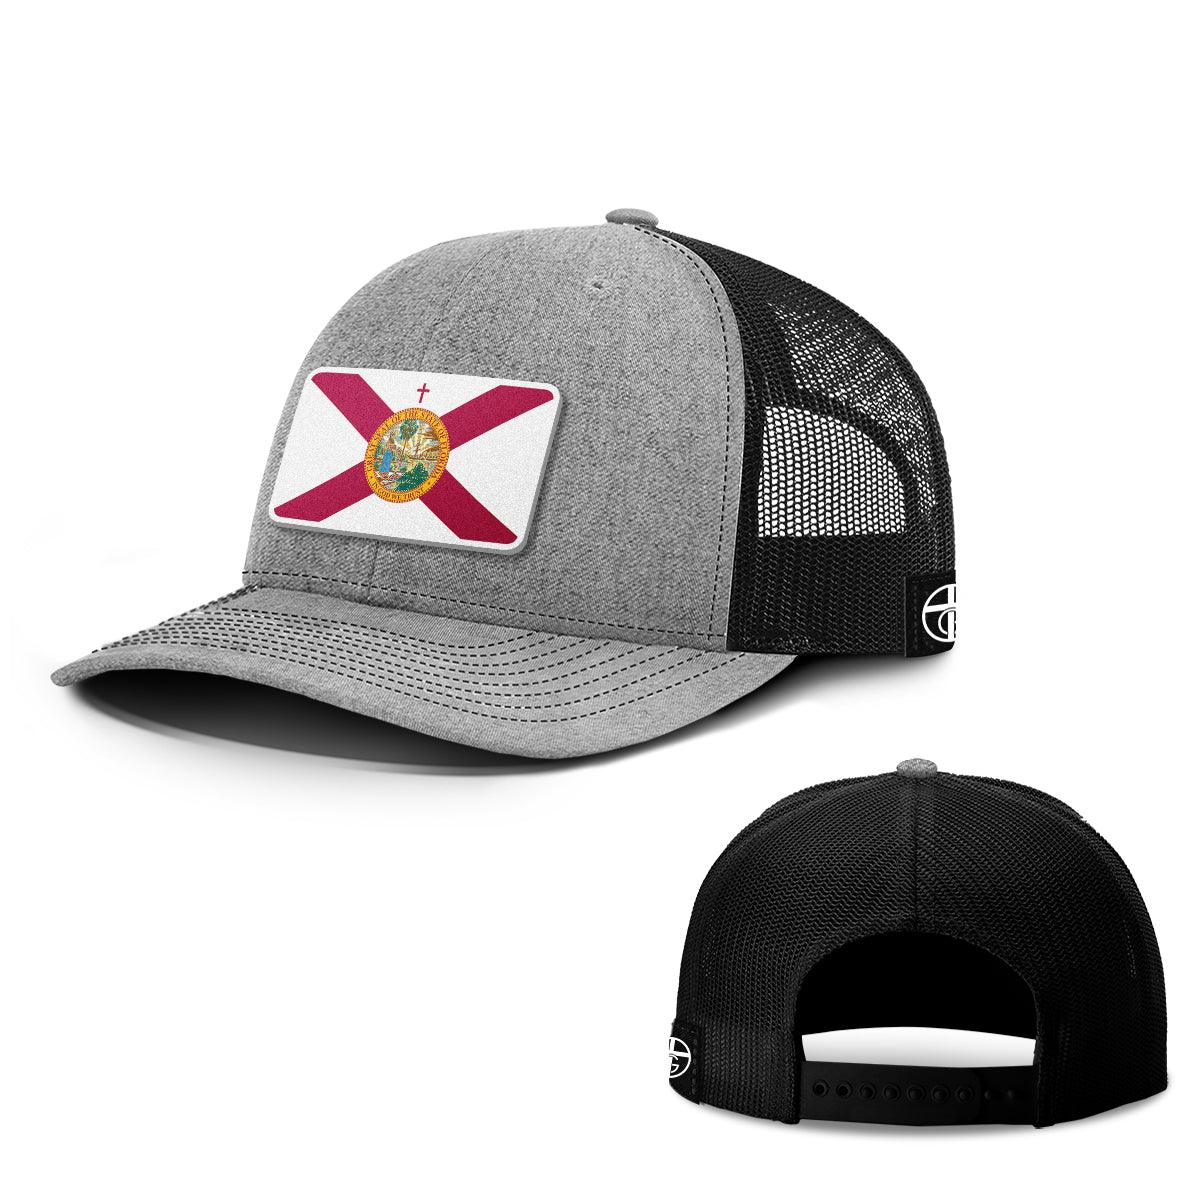 Florida is God’s Country Patch Hats - Our True God